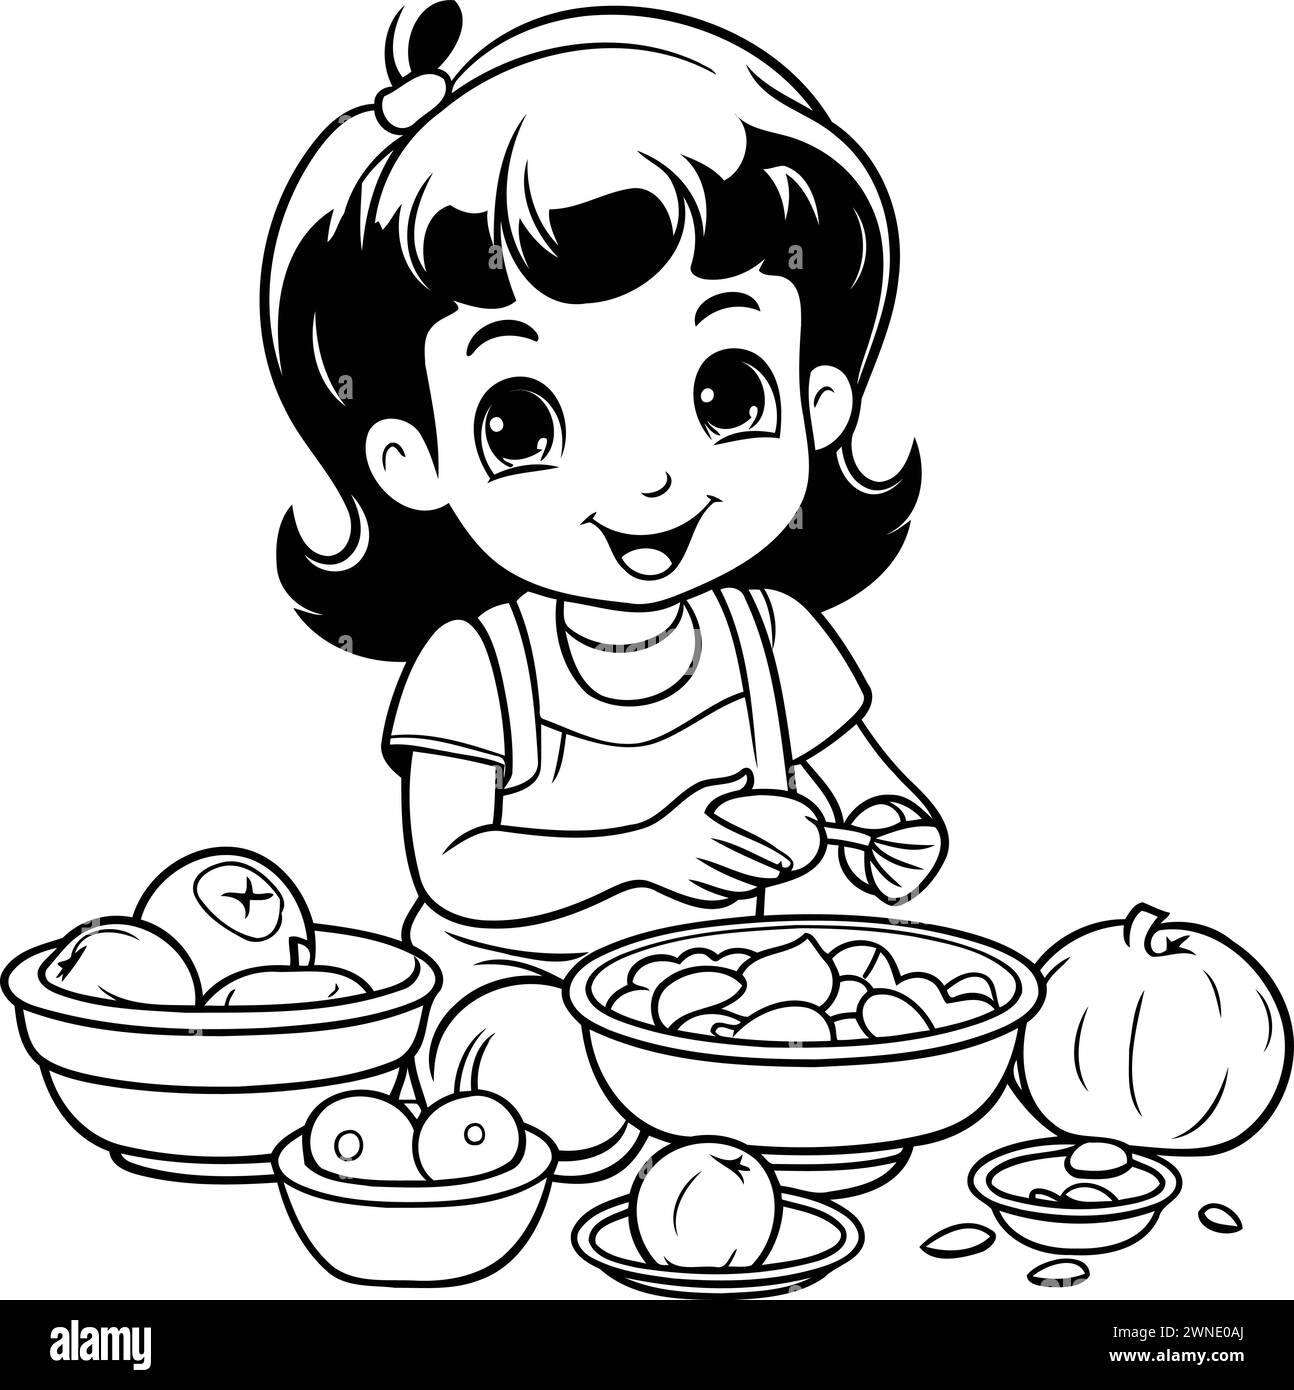 Cute Little Girl Cooking Food - Black and White Cartoon Illustration. Vector Stock Vector